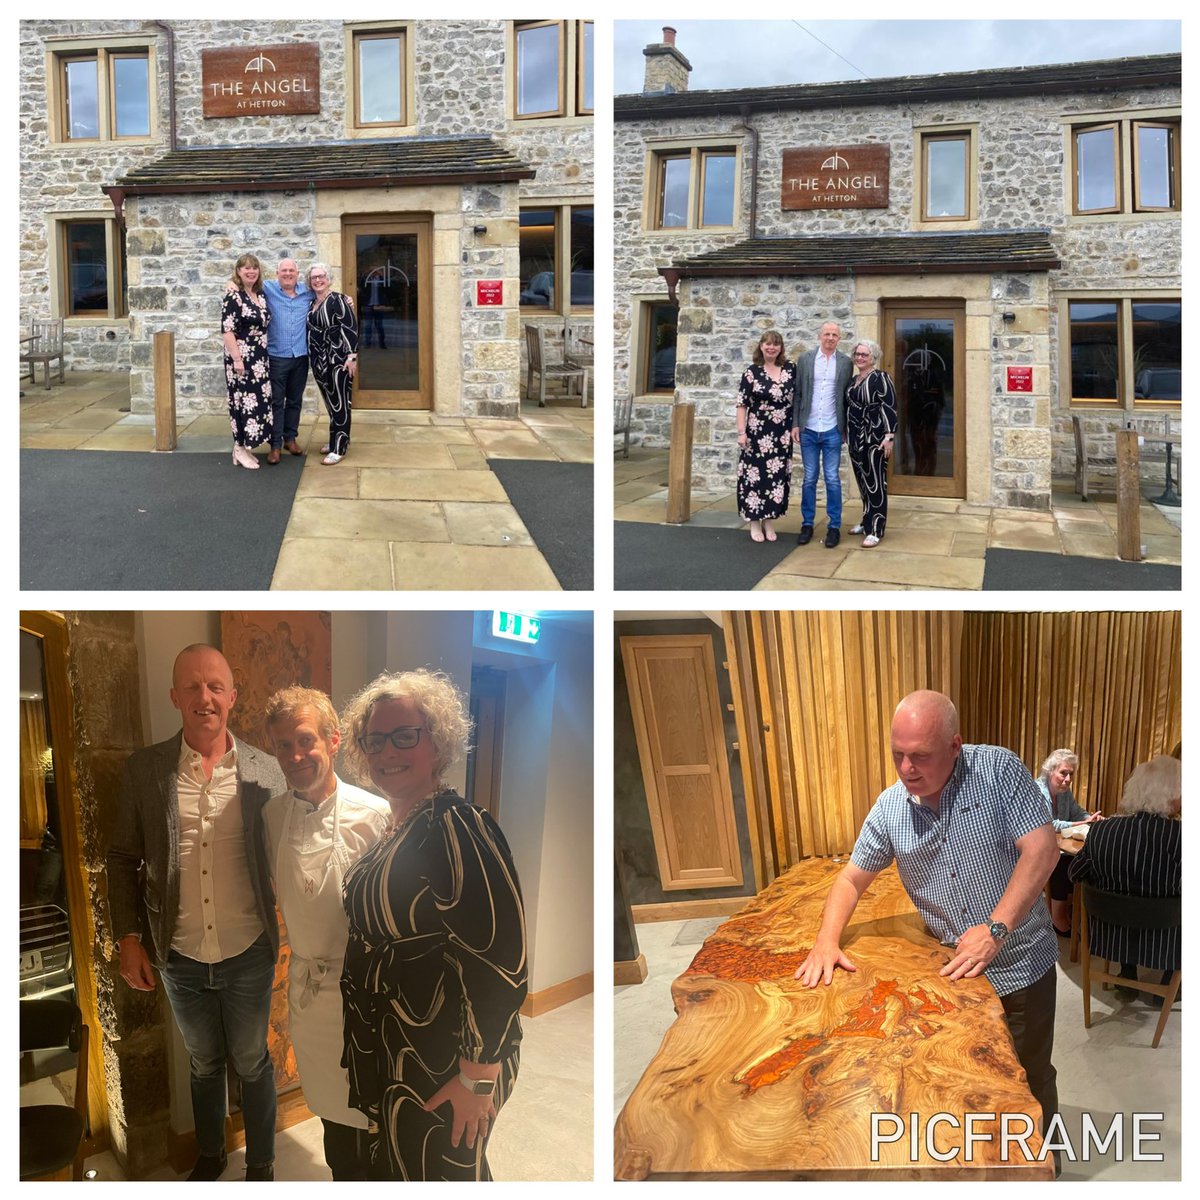 Thank you to the @AngelHetton @MichaelWignall_ for a night we’ll never forget amazing memories with outstanding food and service we’d like to say a special thank you to Jordan , Helen ,Cameron and Lauren for looking after us ❤️⭐️🥂 @nosborkenny